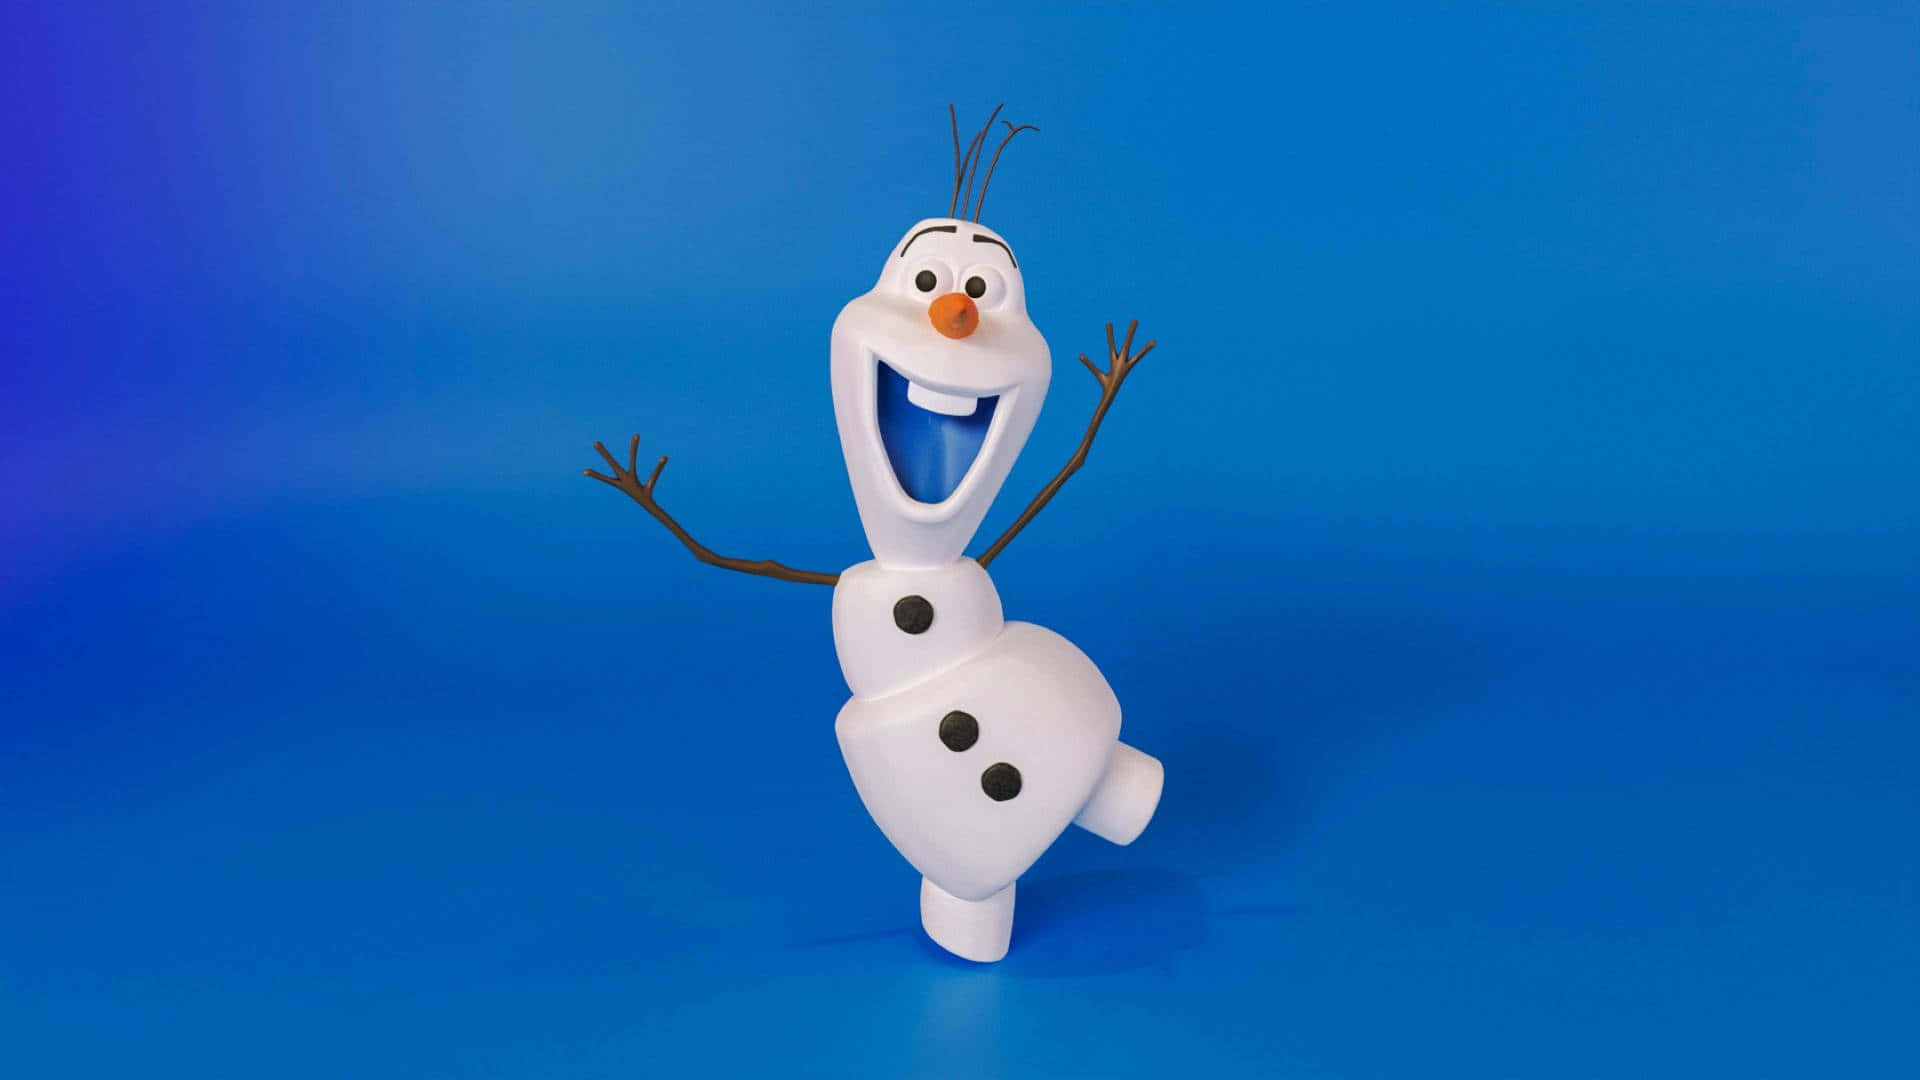 "This Cute Olaf Wants To Make You Smile!" Wallpaper